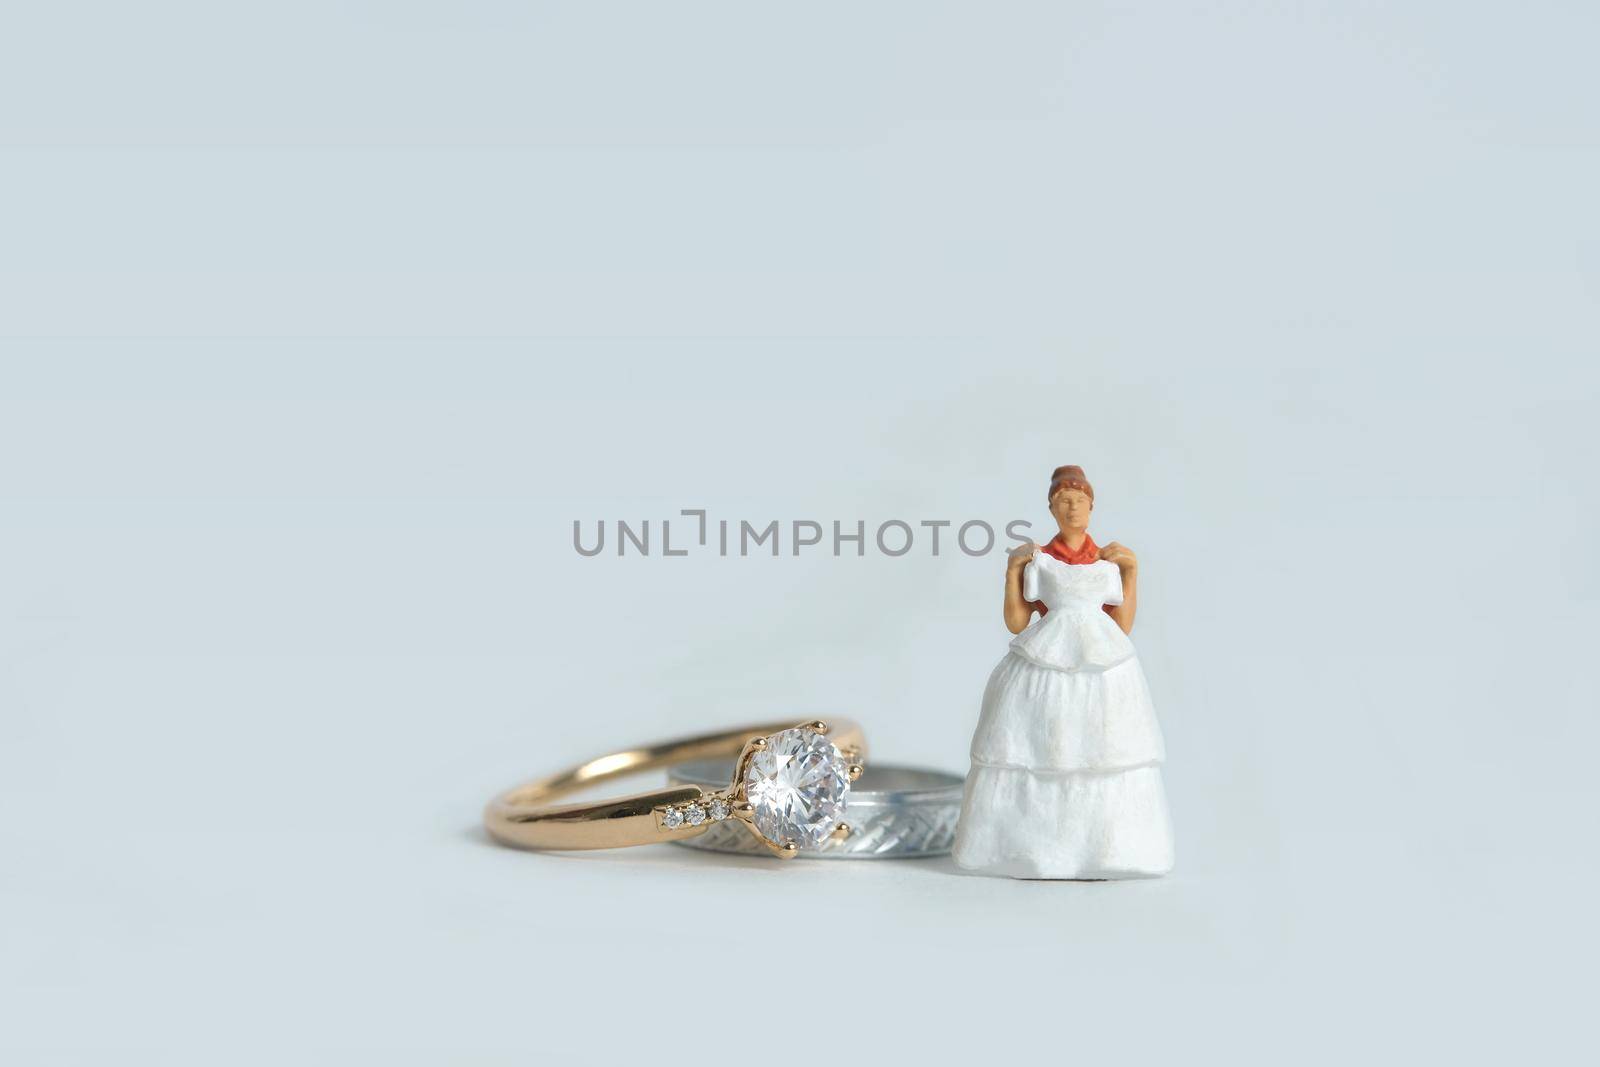 Women miniature people fitting wedding dress standing in front of couple ring, isolated white background. Image photo